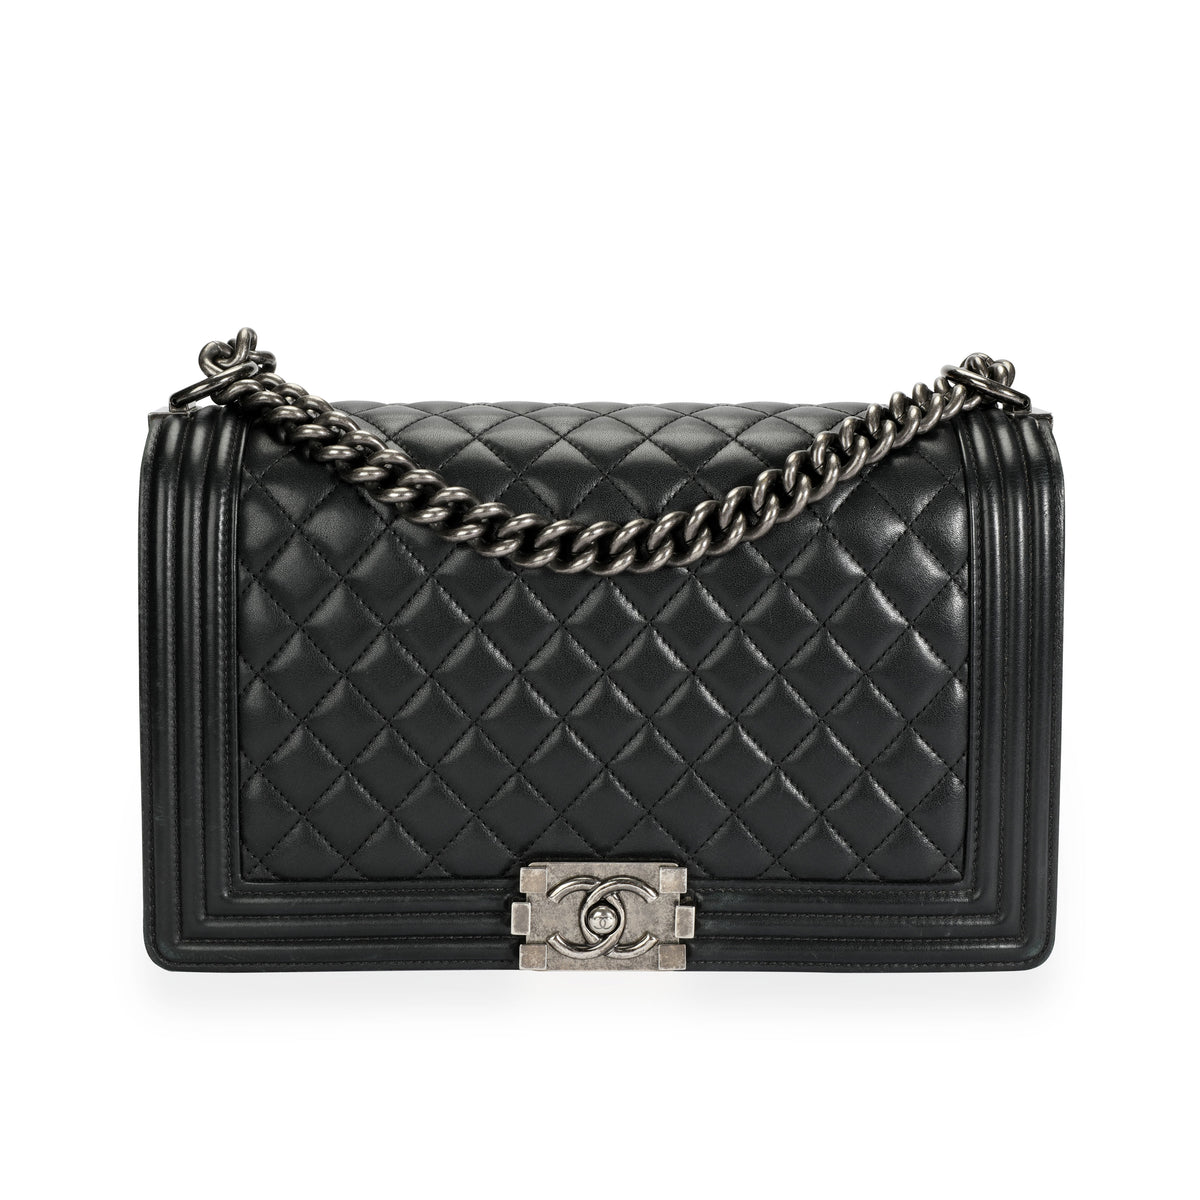 Black Quilted Patent Leather Medium Boy Bag Silver Hardware, 2014-2015